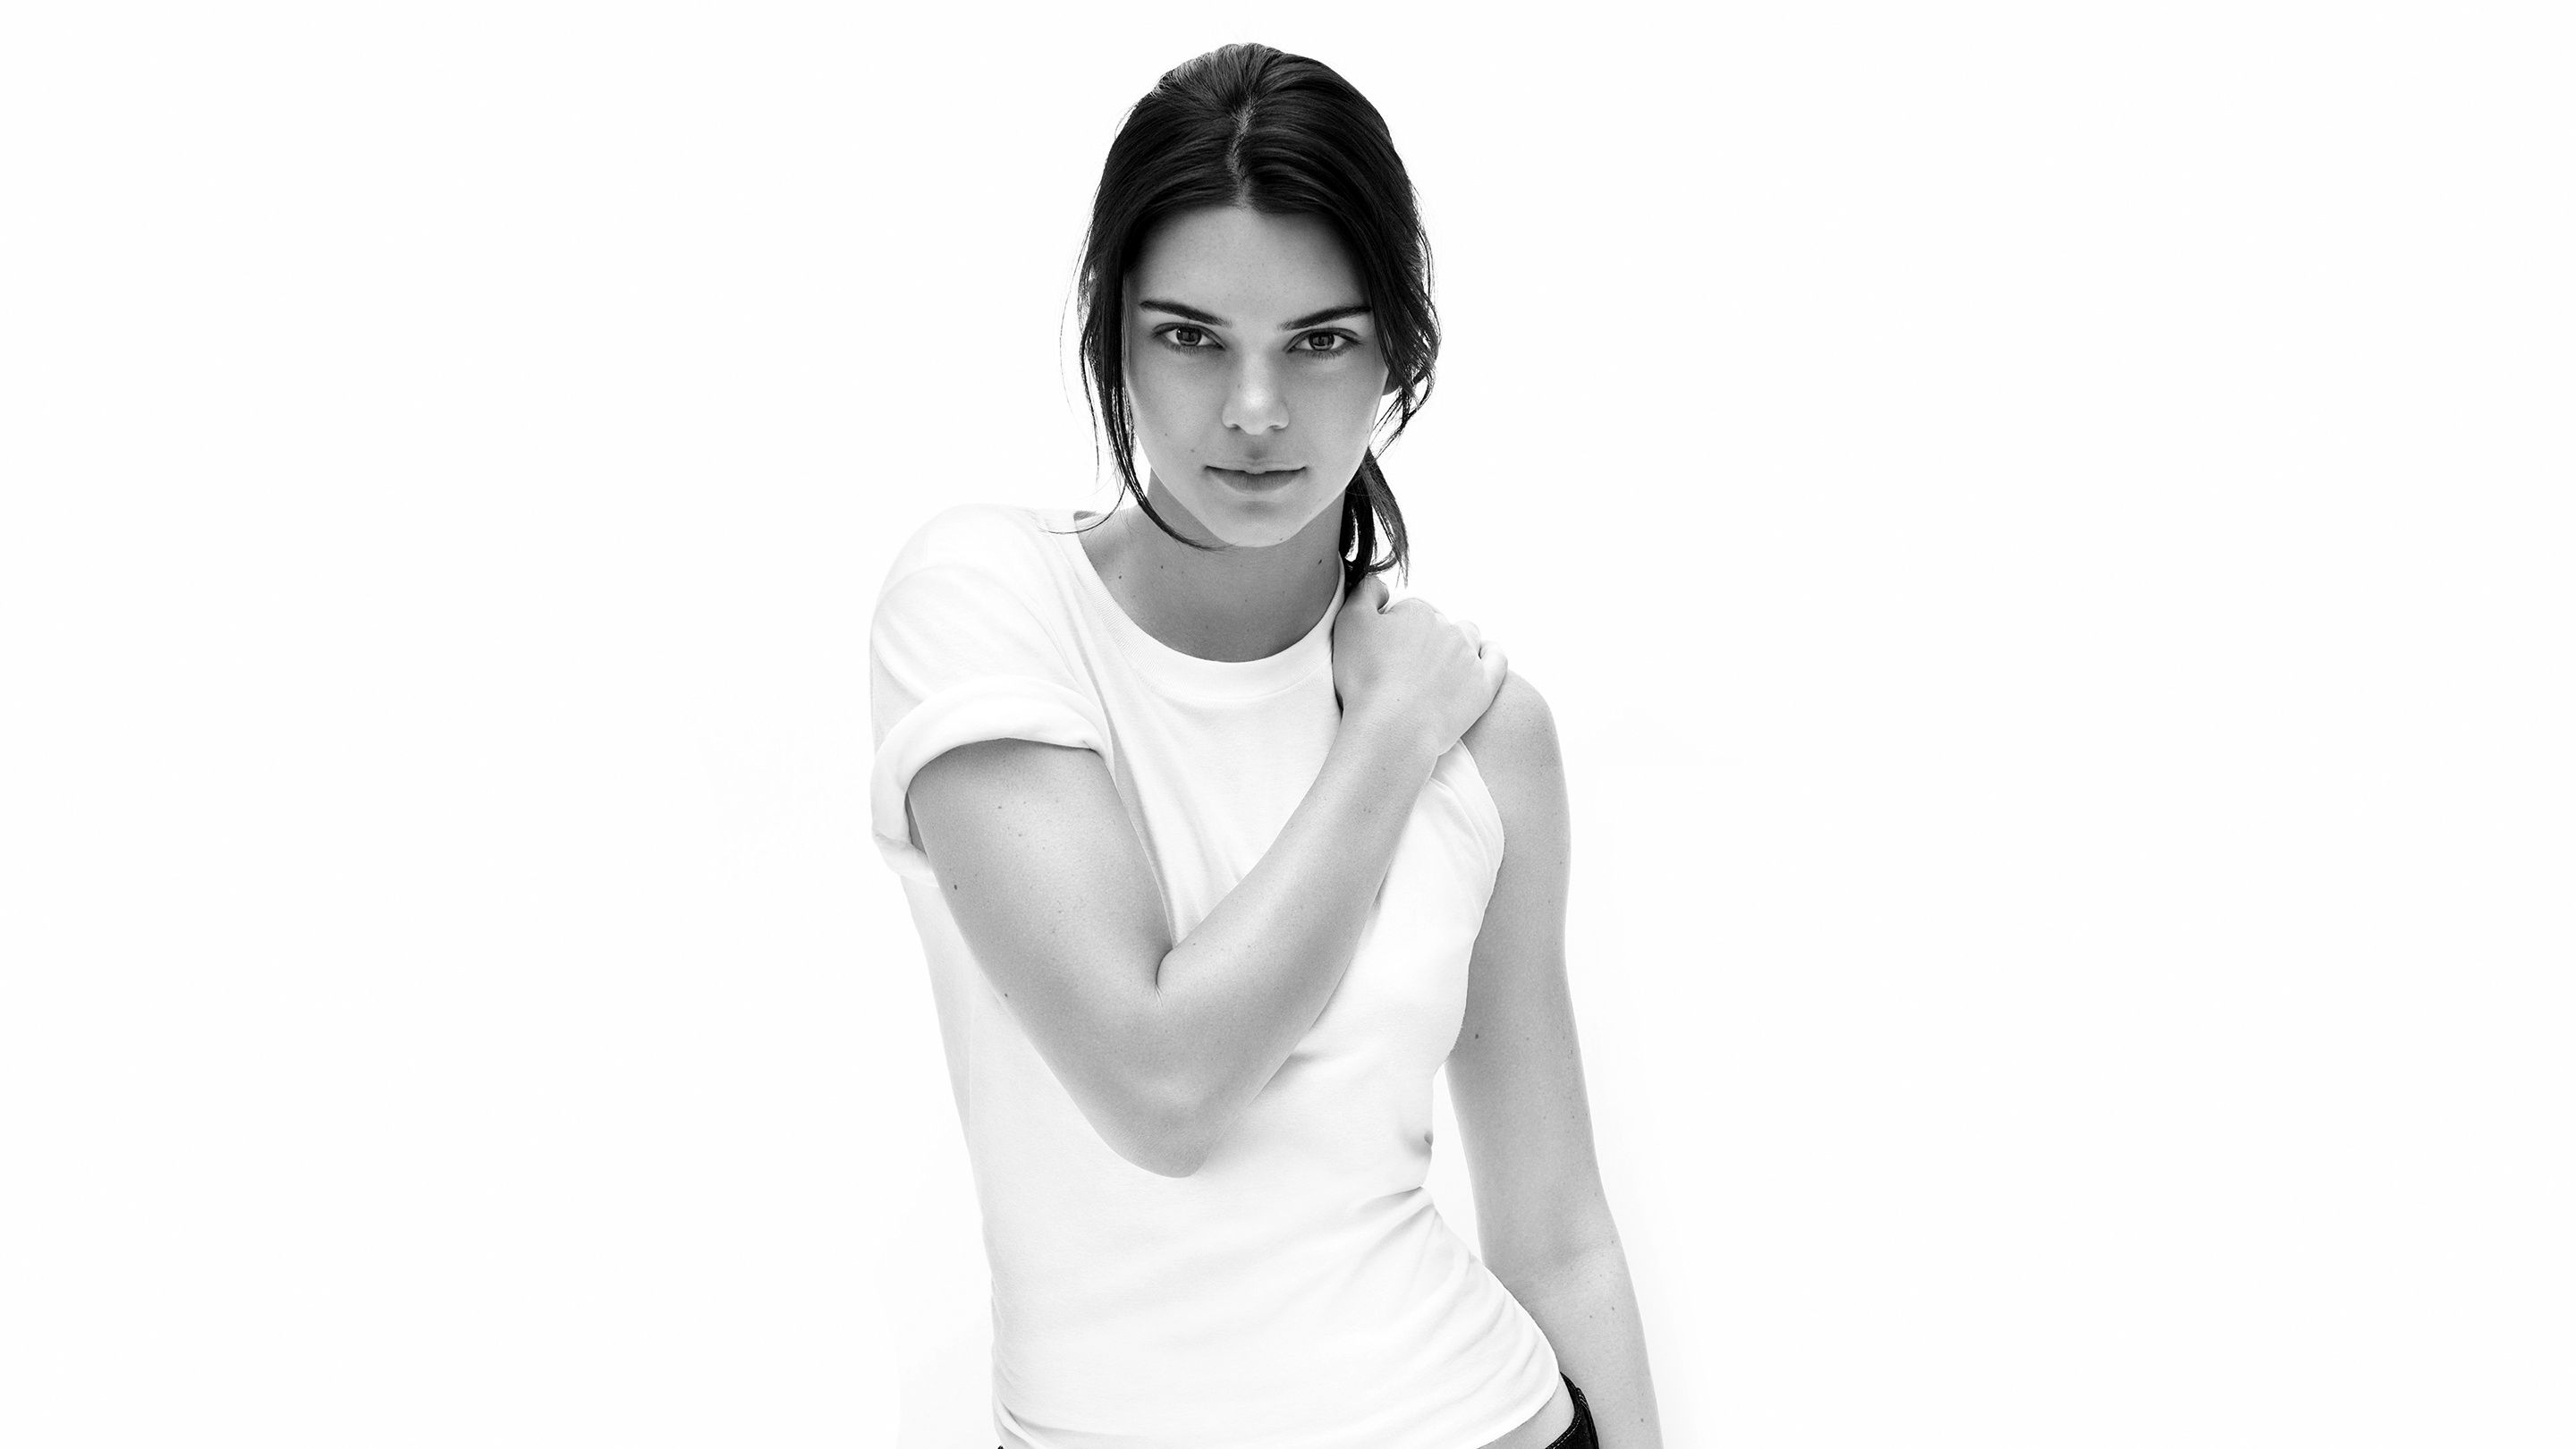 Kendall Jenner Monochrome Hd, HD Celebrities, 4k Wallpaper, Image, Background, Photo and Picture